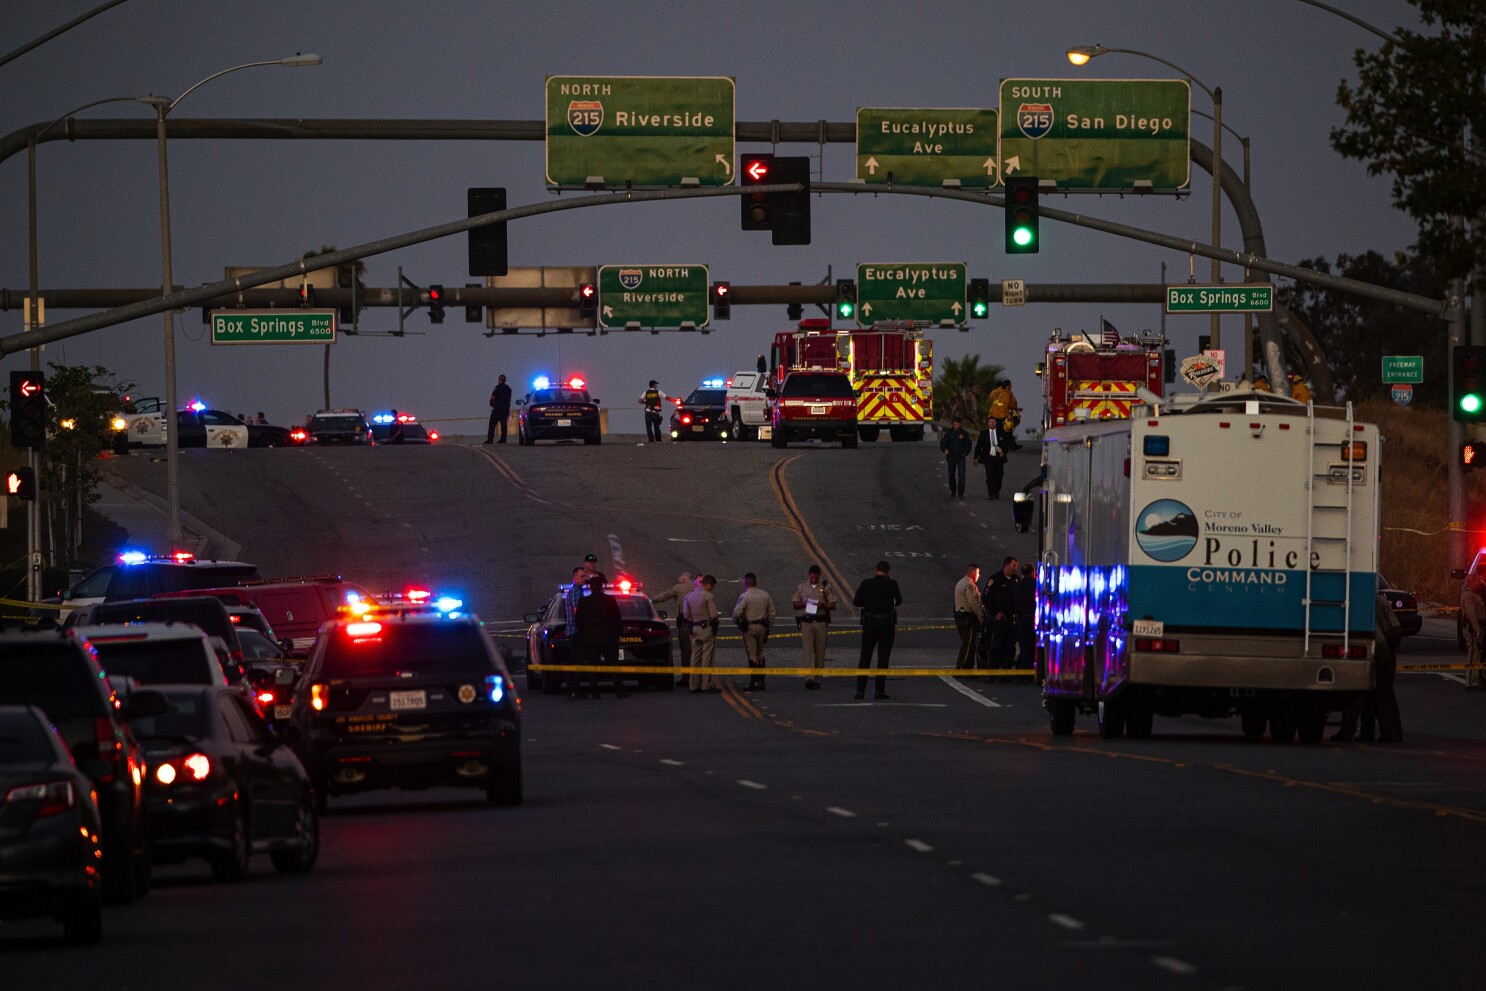 Rifle Used In Deadly Riverside Shooting Was Untraceable Ghost Gun Sources Say Los Angeles Times